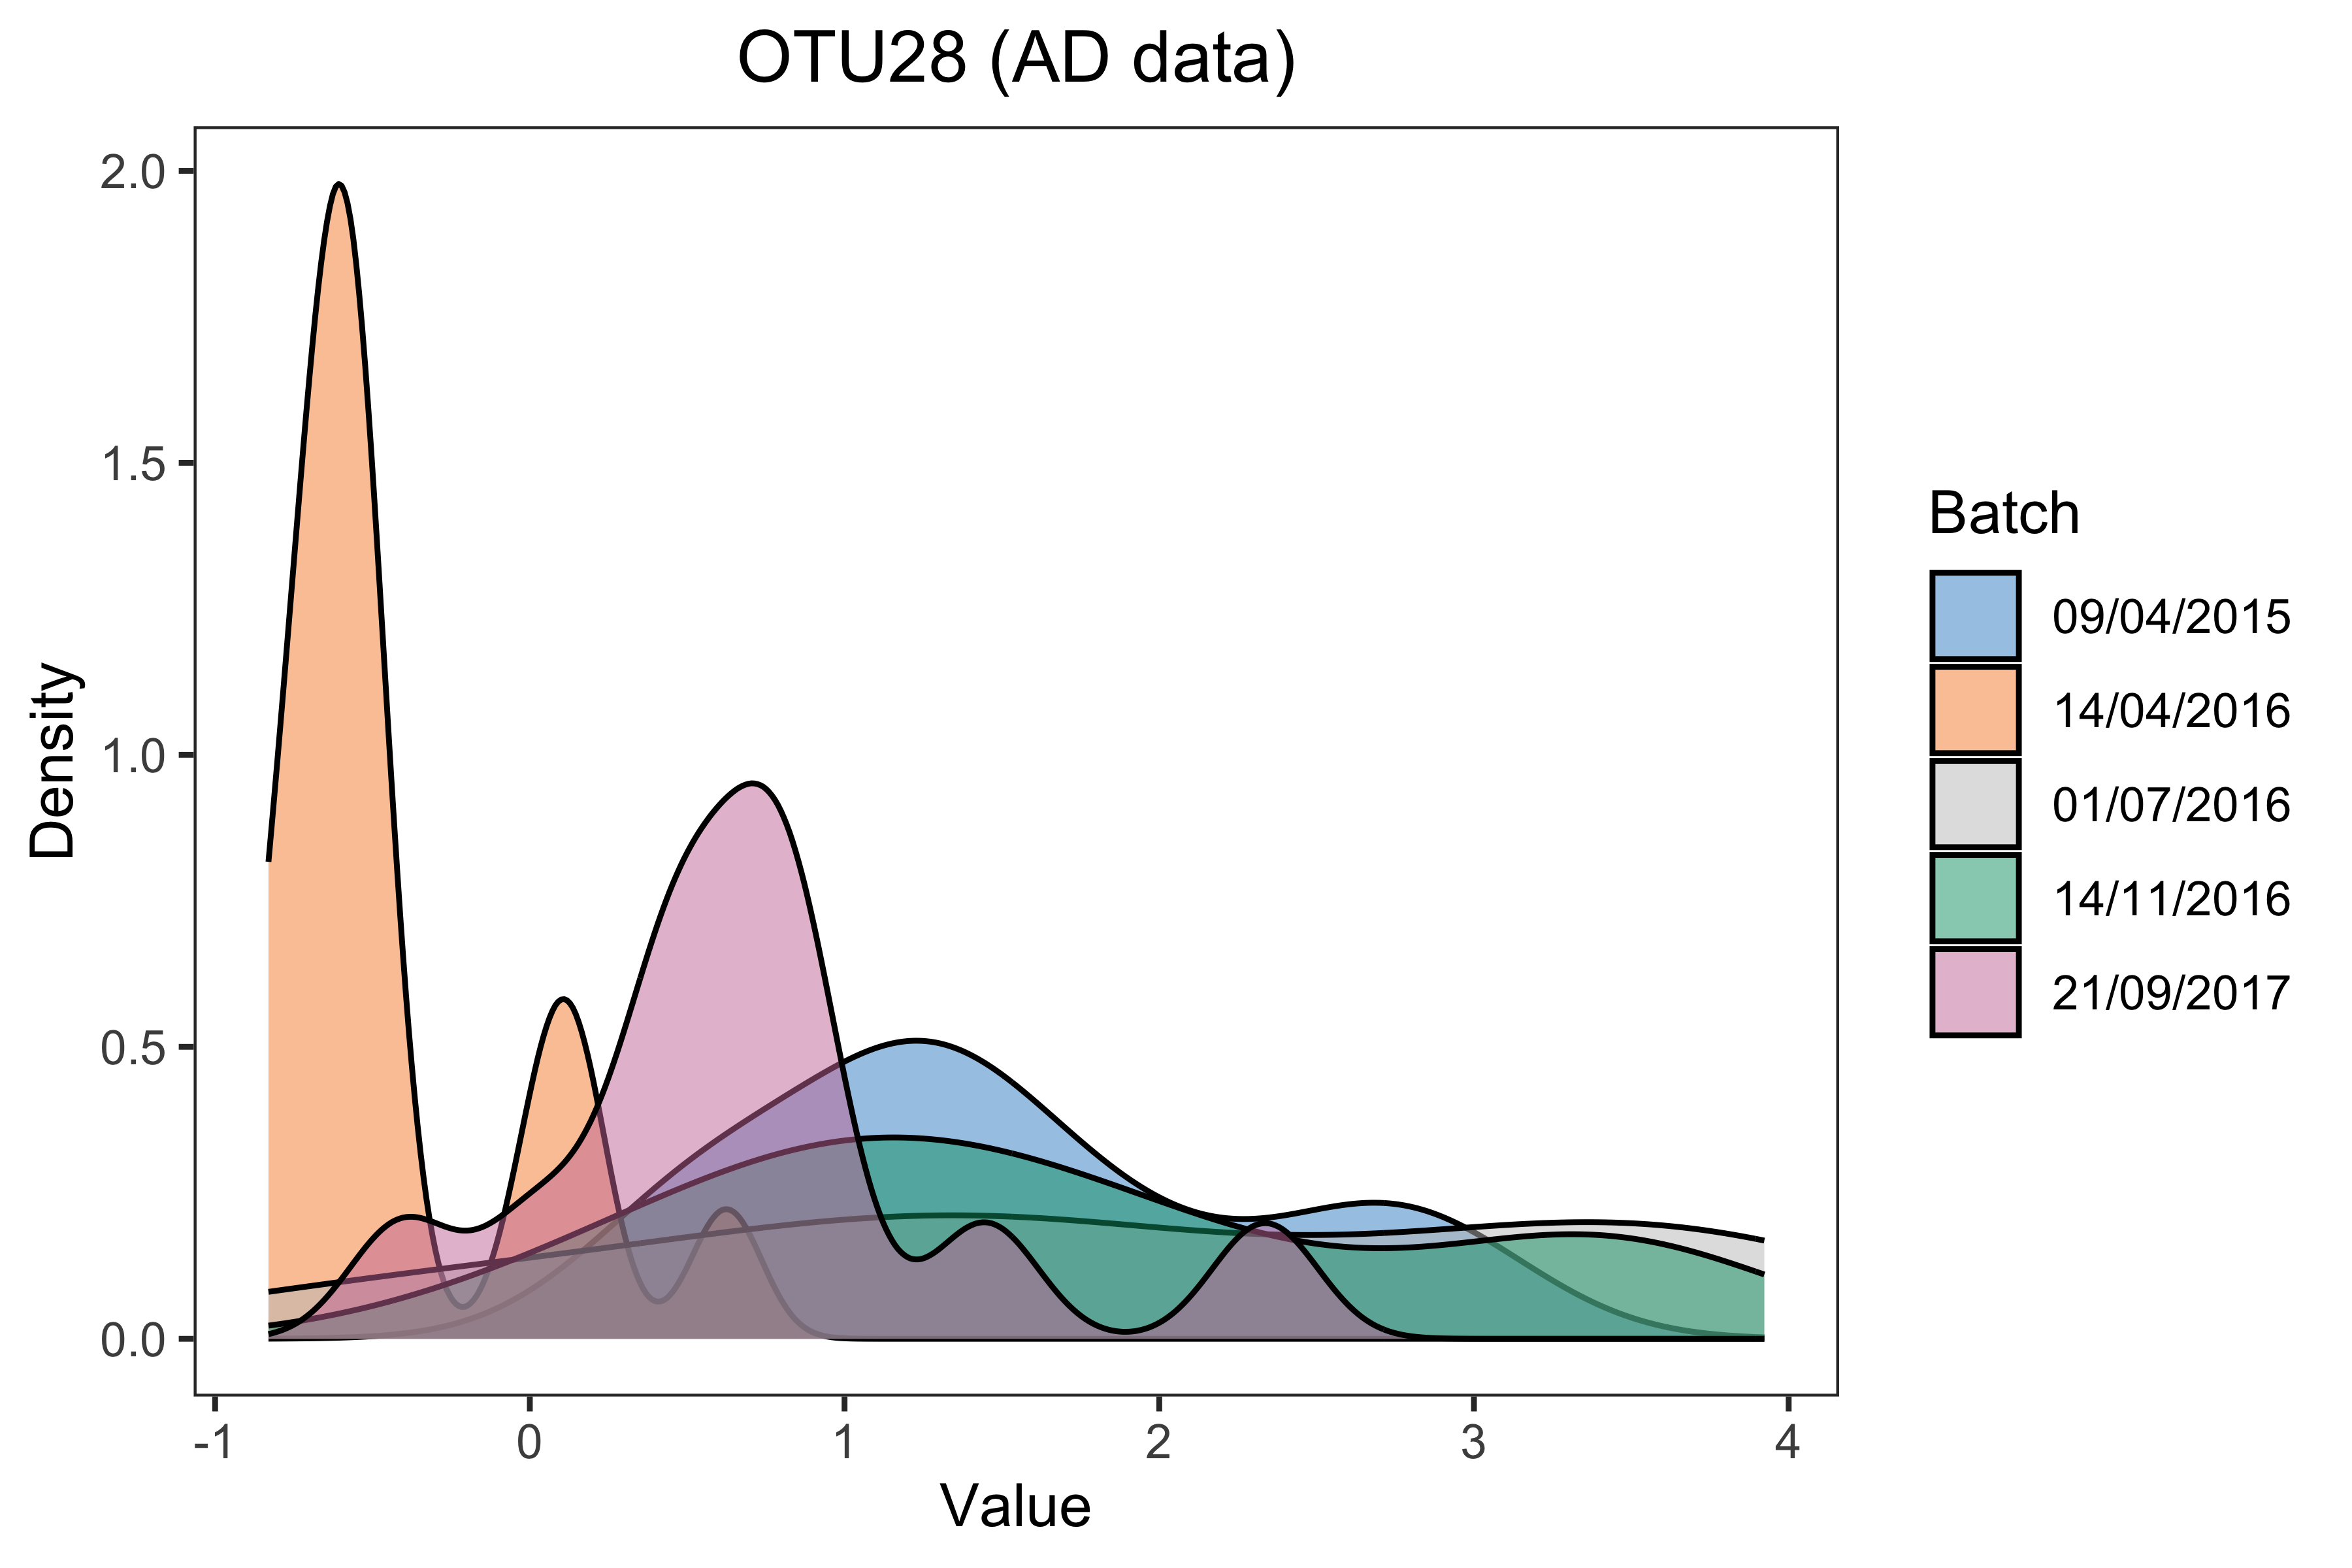 Density plots of sample values in "OTU28" before batch effect correction in the AD data.